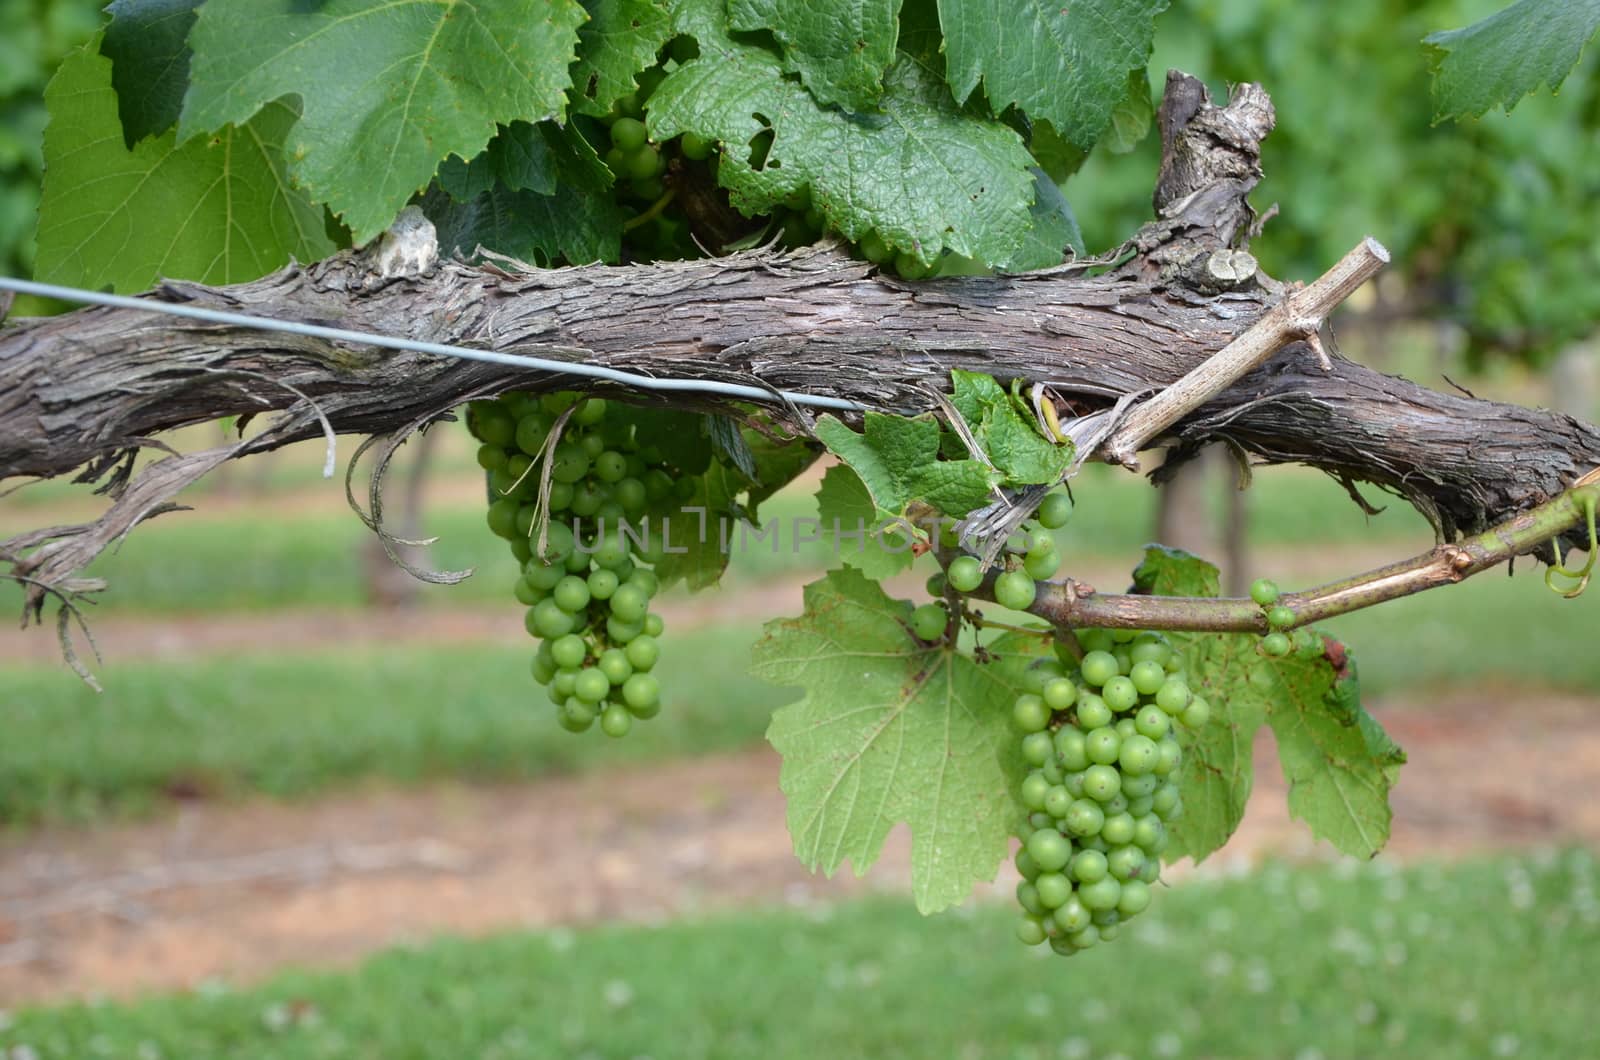 Grapes o n the vine by northwoodsphoto